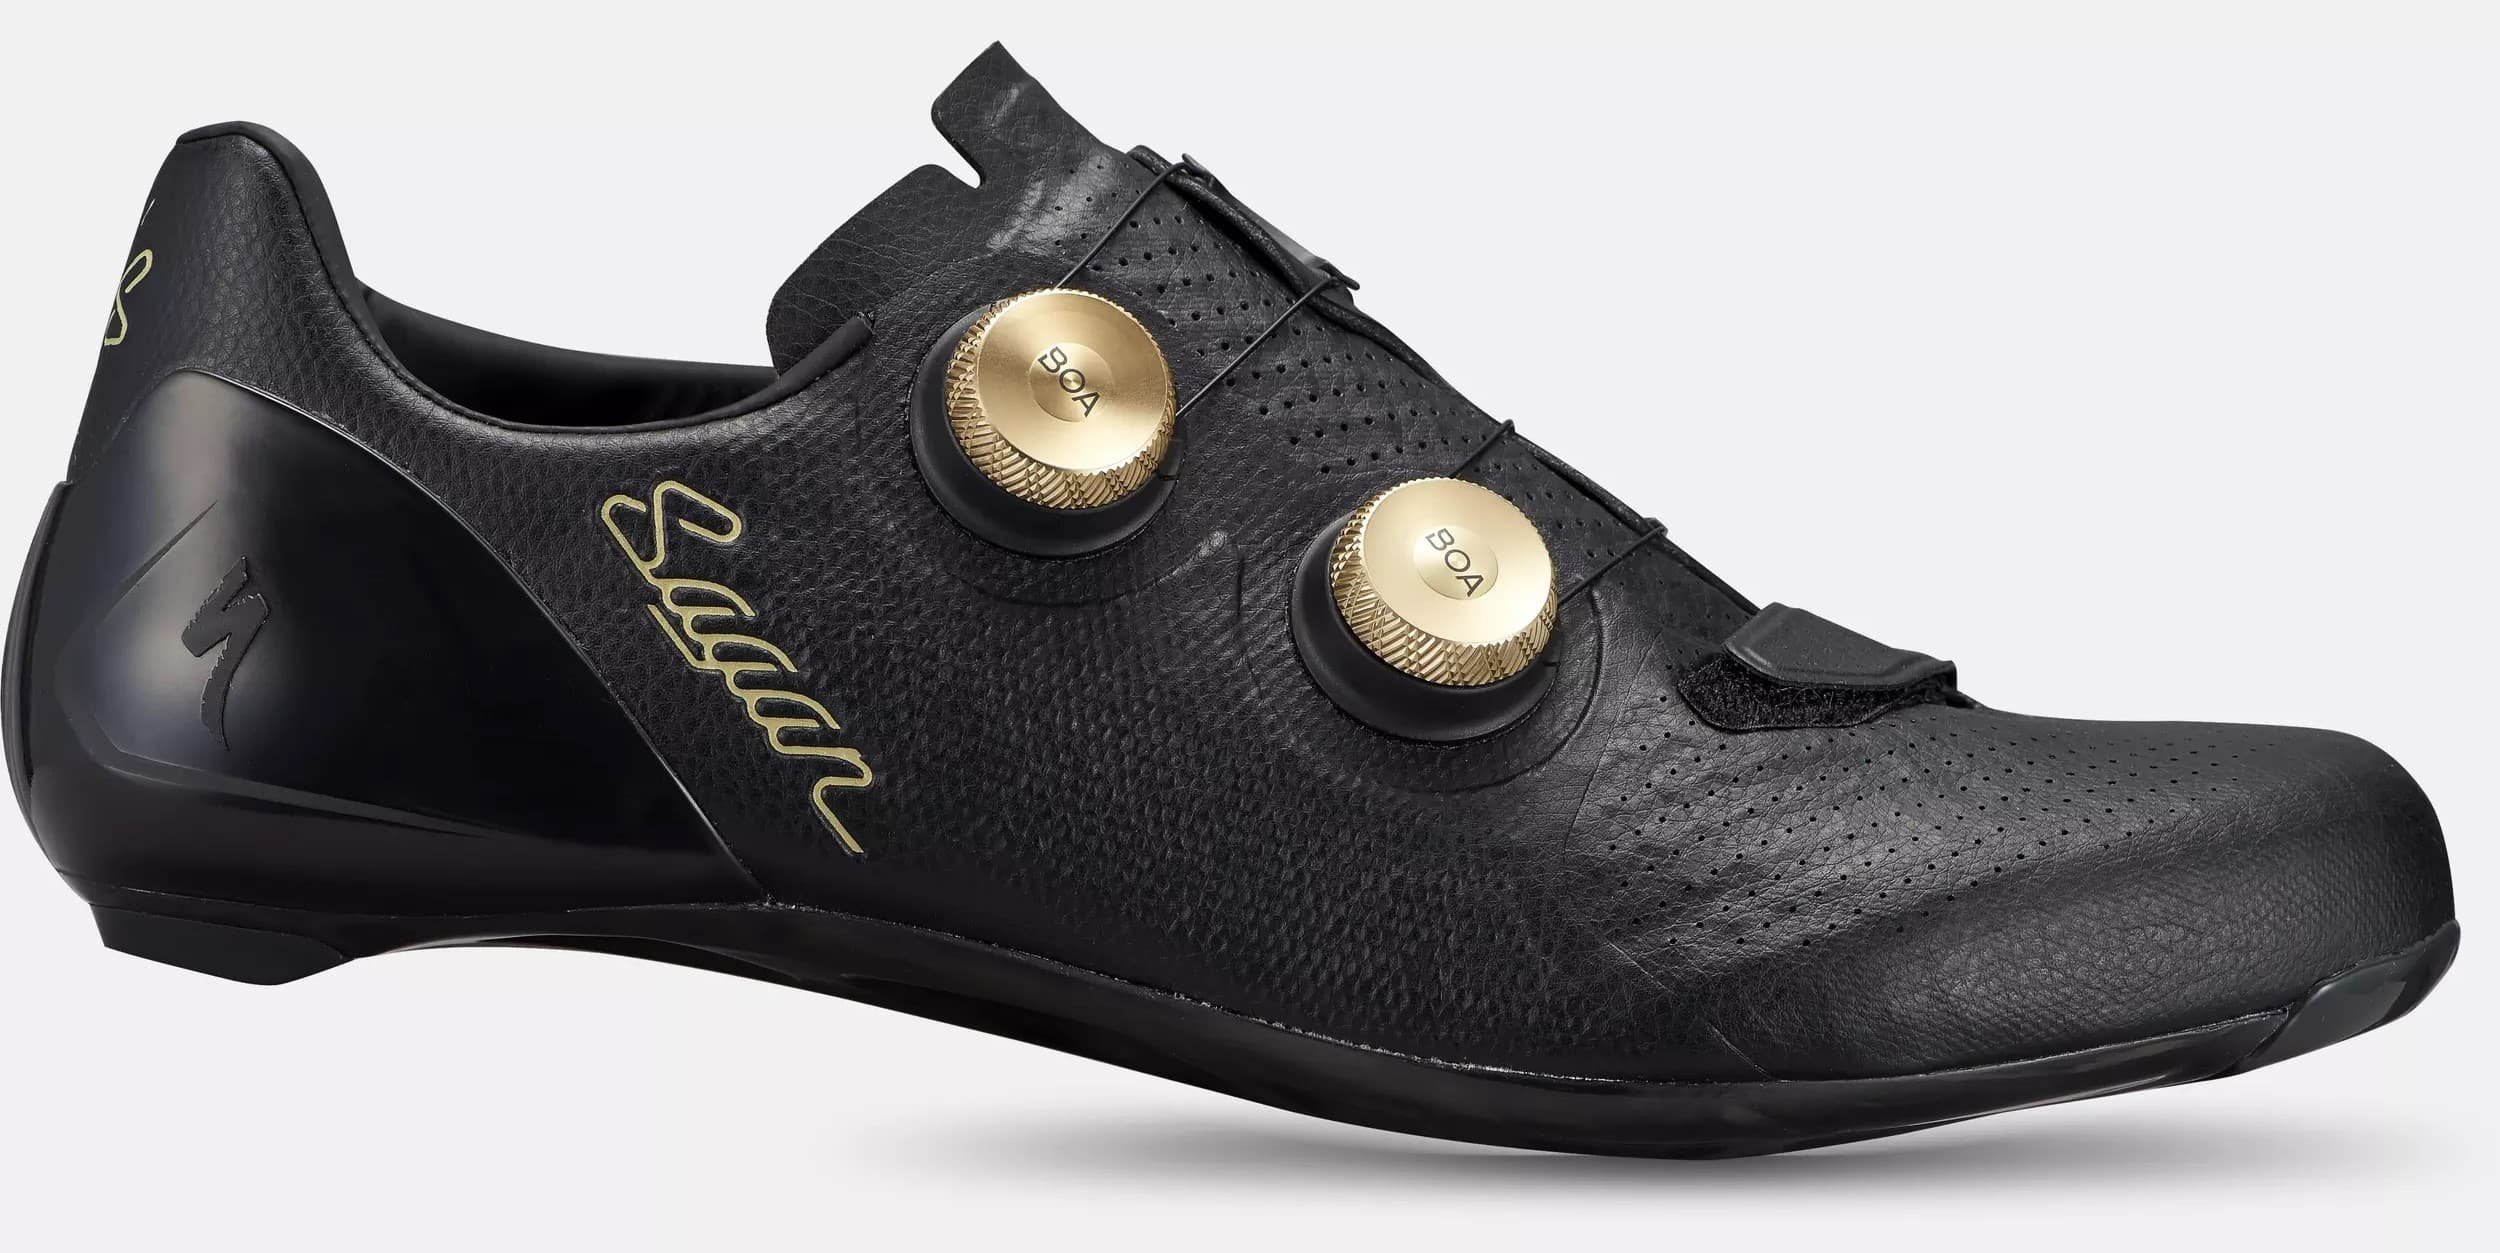 Specialized S-Works 7 Road Shoes - Sagan Collection